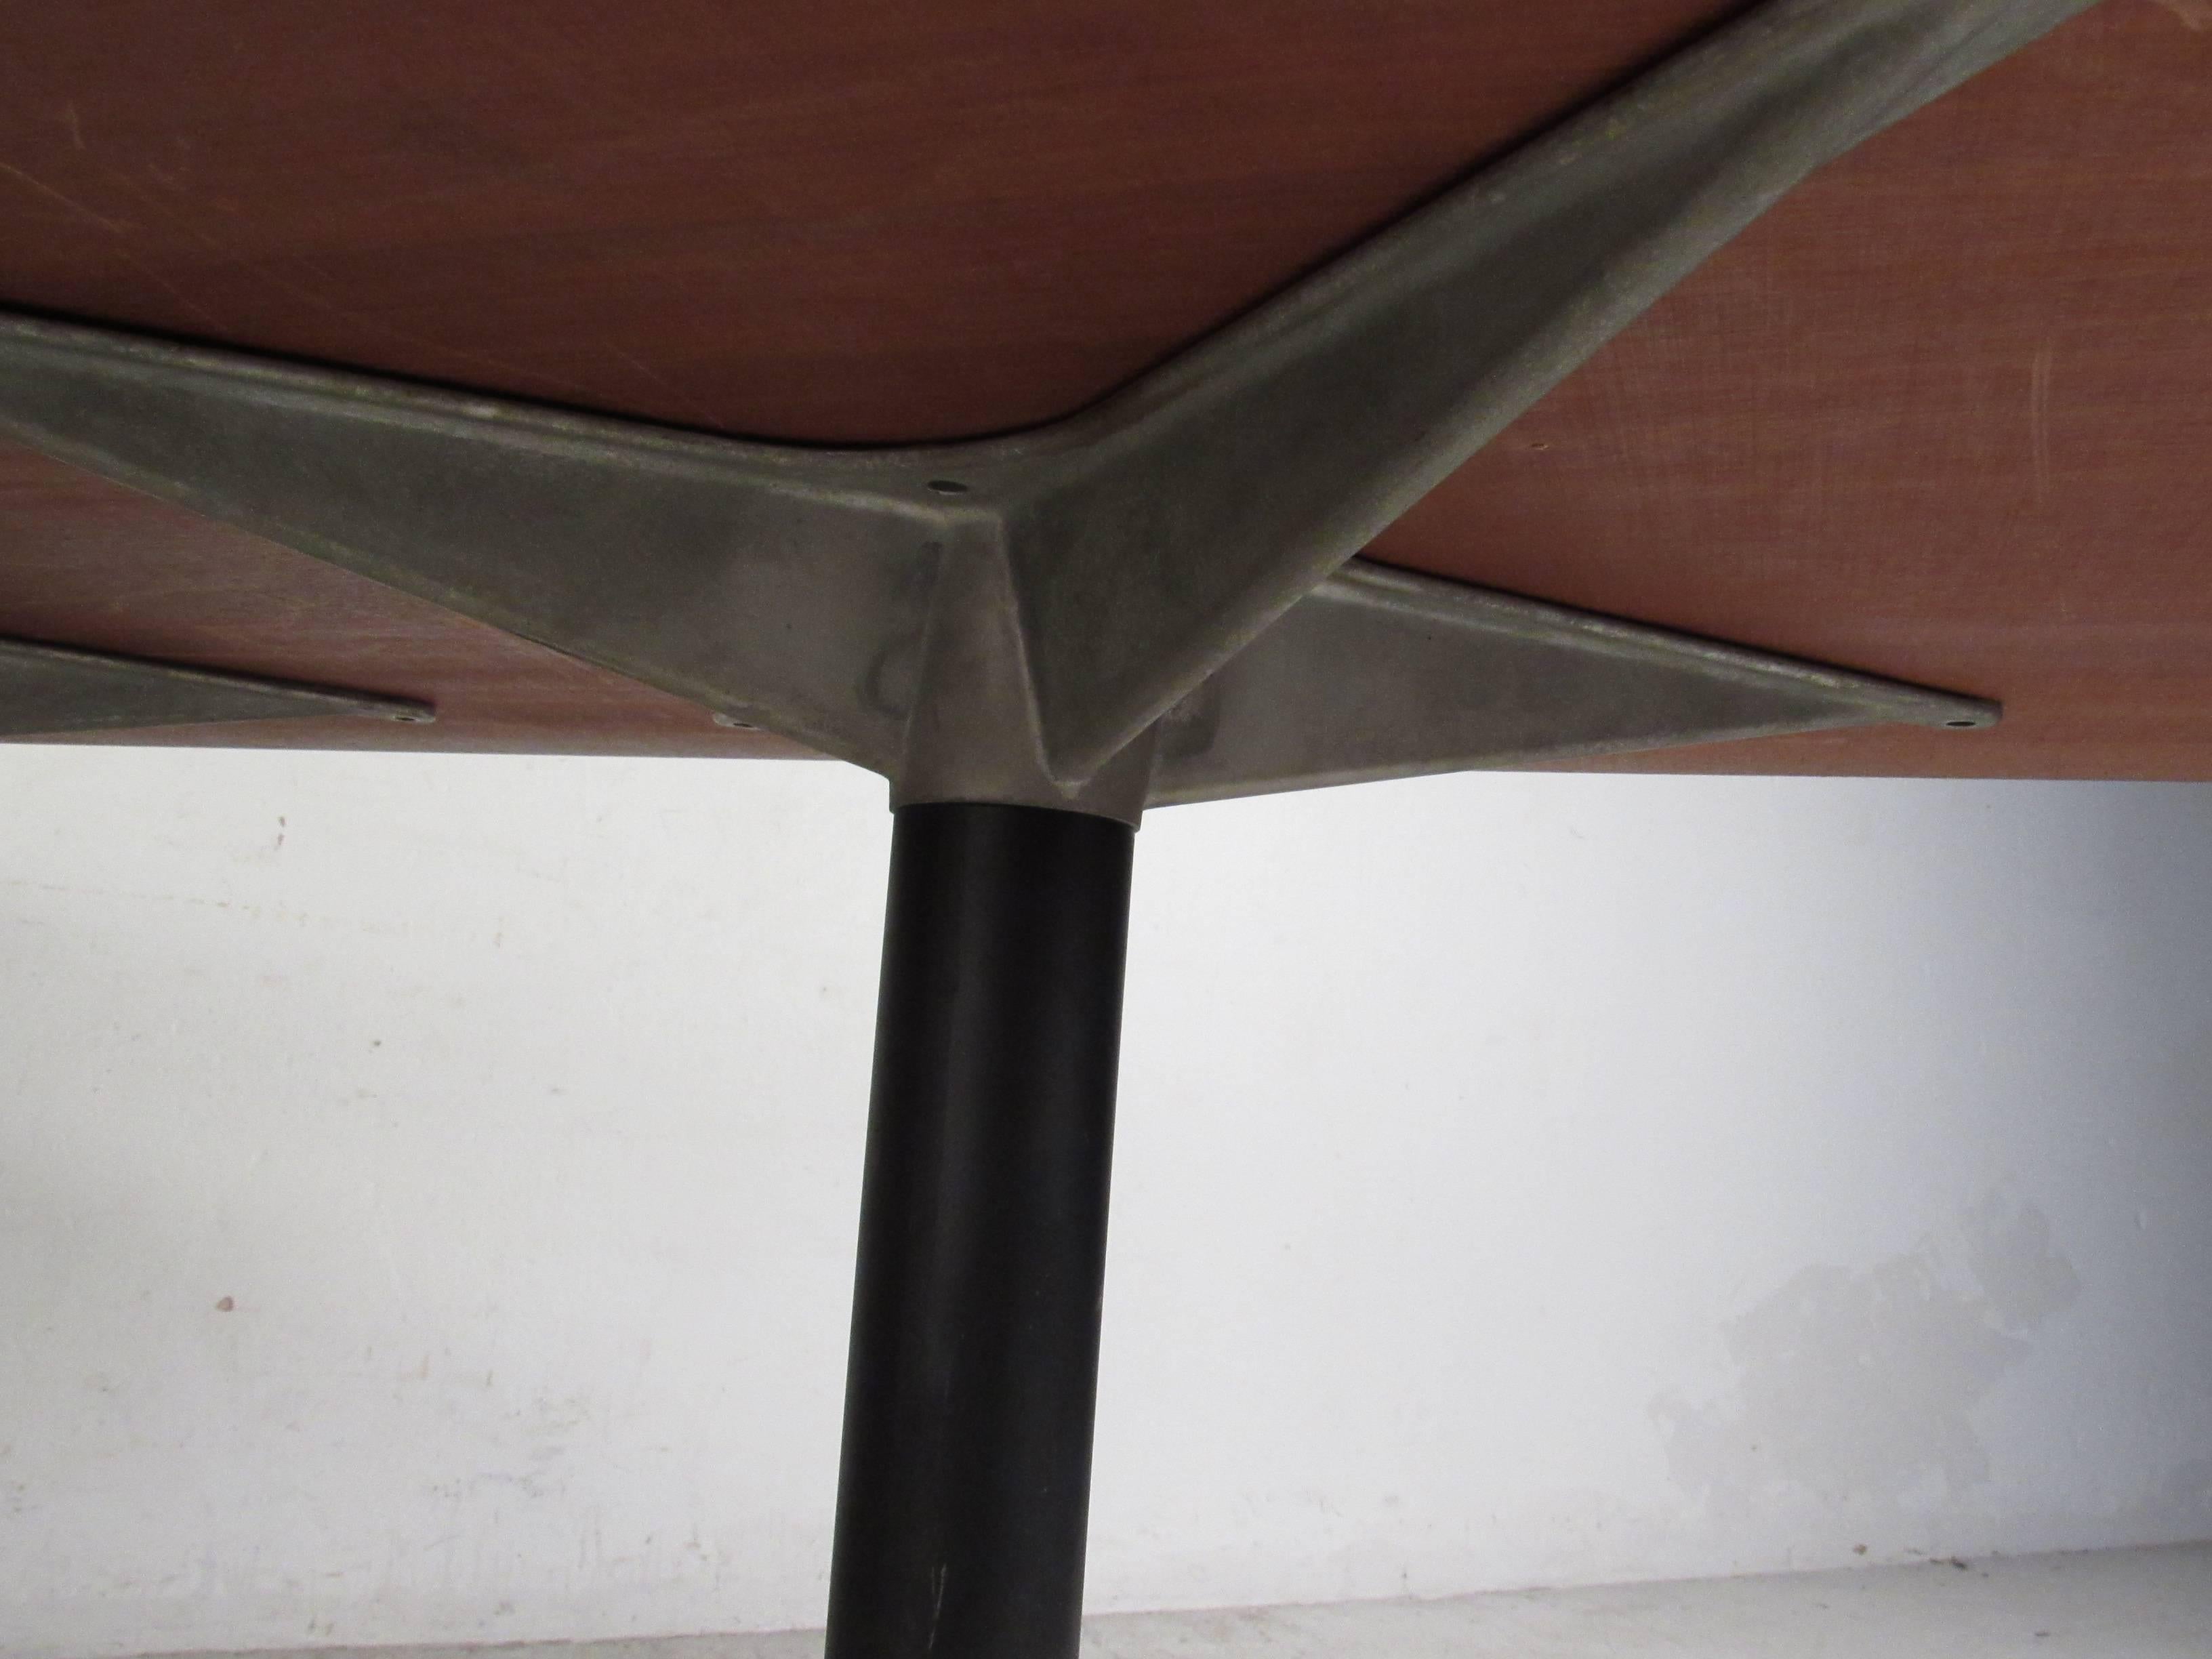 Aluminum Mid-Century Modern Conference Table with Charles Eames for Herman Miller Base